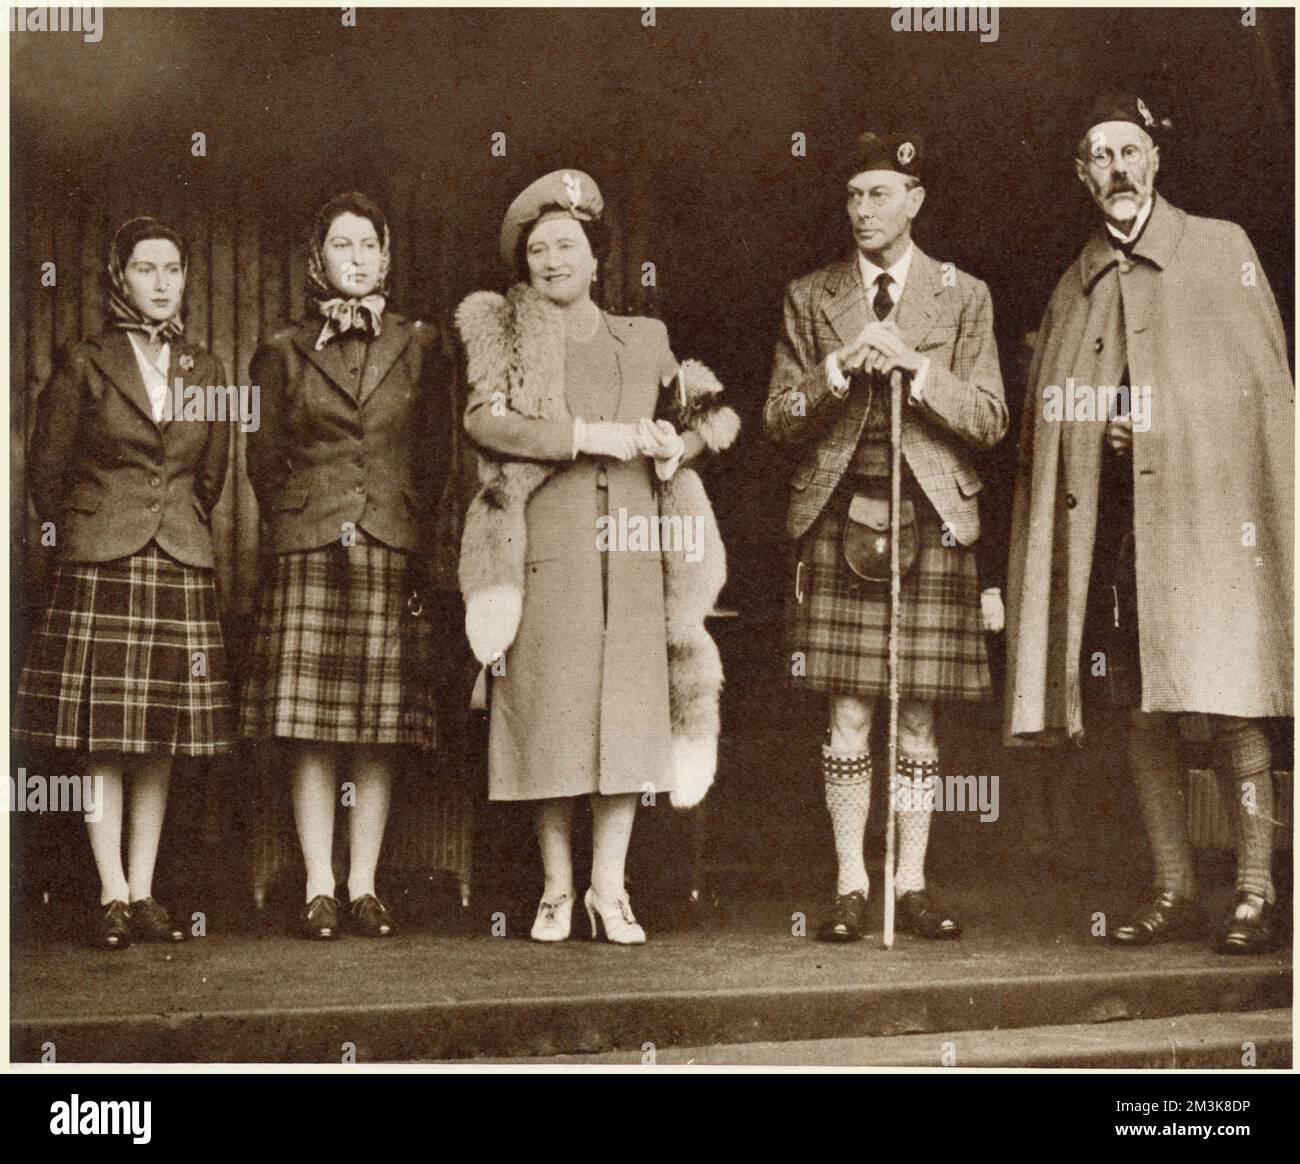 King George VI and Queen Elizabeth, with Princesses Elizabeth and Margaret, with the Marquess of Aberdeen, in the Royal Pavilion at Braemar. It was the first post-war Braemar Gathering and the wettest in memory. 25,000 spectators attended. The King and Princess Elizabeth are seen wearing the Balmoral tartan. Prince Philip of Greece, who was staying at Balmoral, came with the Royal party.     Date: 1946 Stock Photo